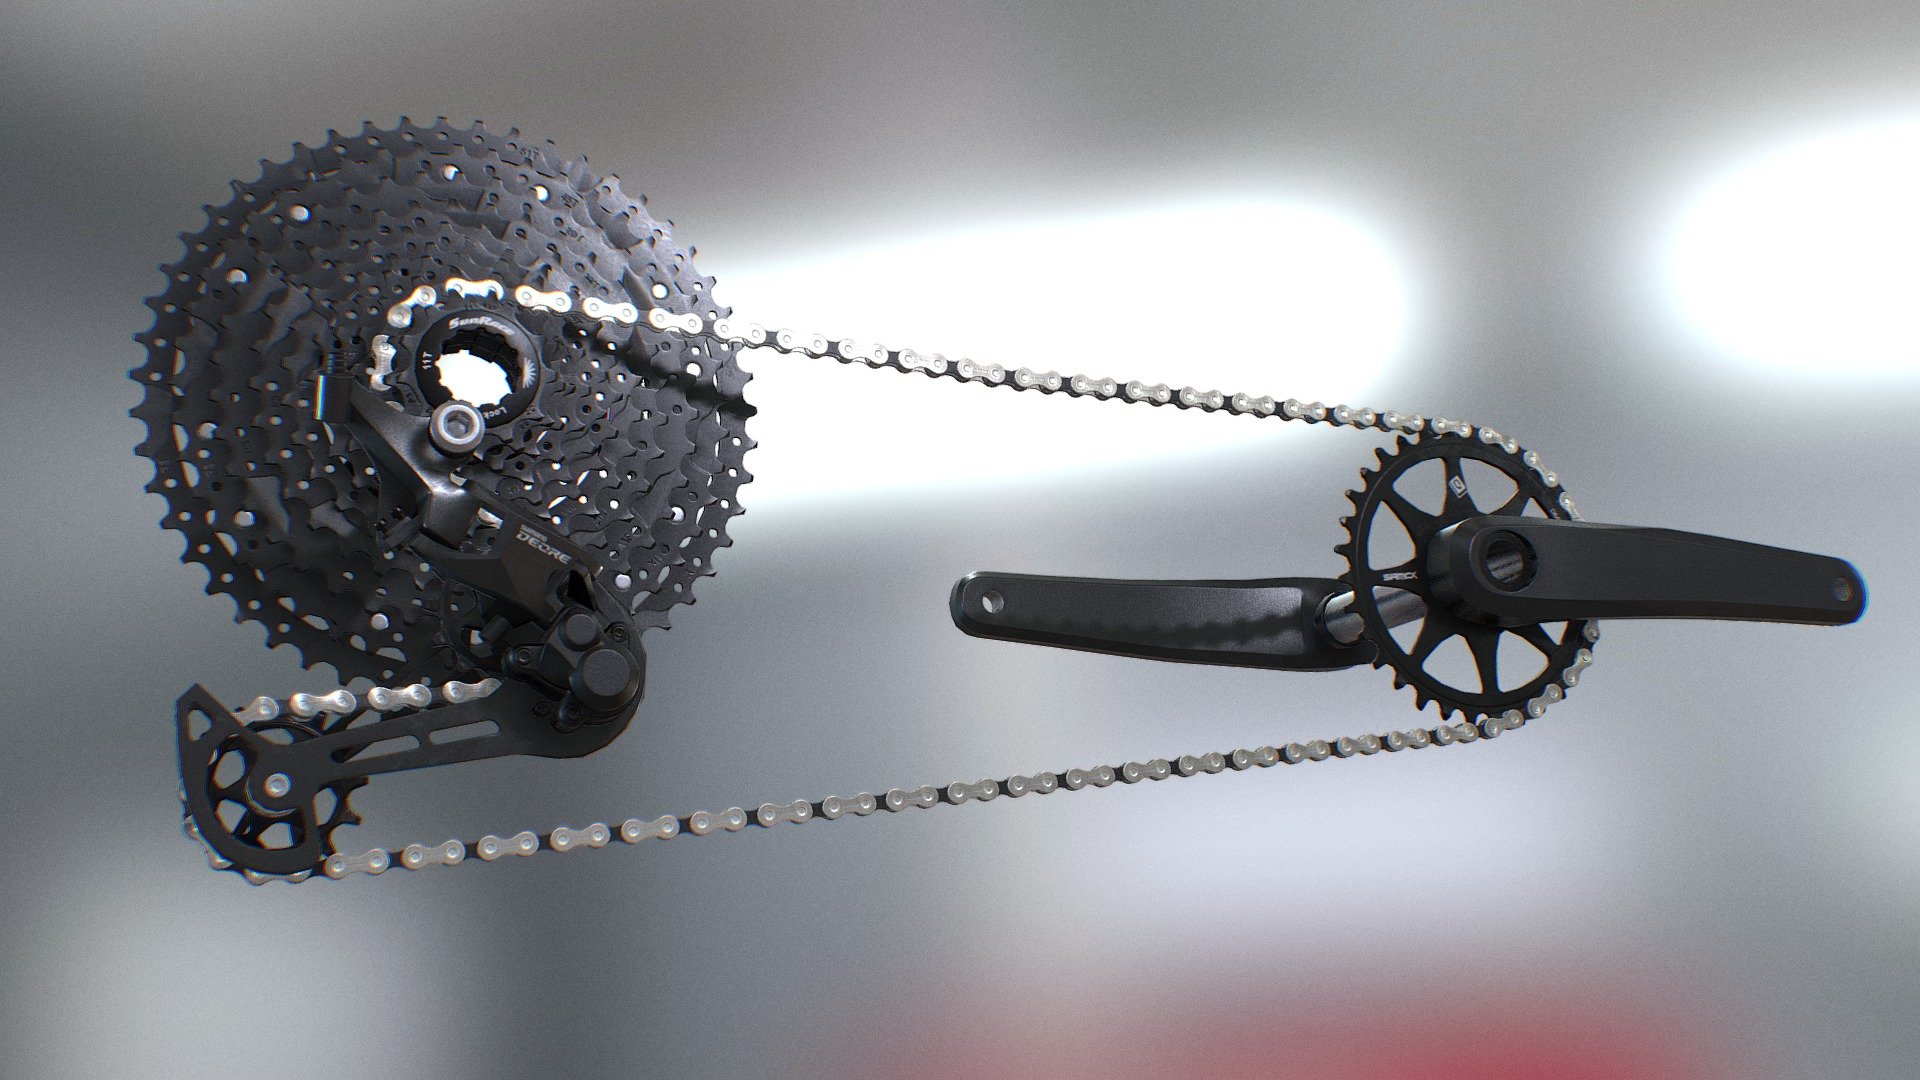 This is a 3d model of MTB drivetrain for using in mountain bikes. It is can be used as a driving equipment for downhill, enduro, crosscountry or EMTBs in sports racing games and many other product rendering scenes.

This model is created in 3DsMax and textured in Substance Painter.

This model is made in real proportions.

PBR Maps include- Base color, A.O, Roughness, Metallic and Normals 3d model